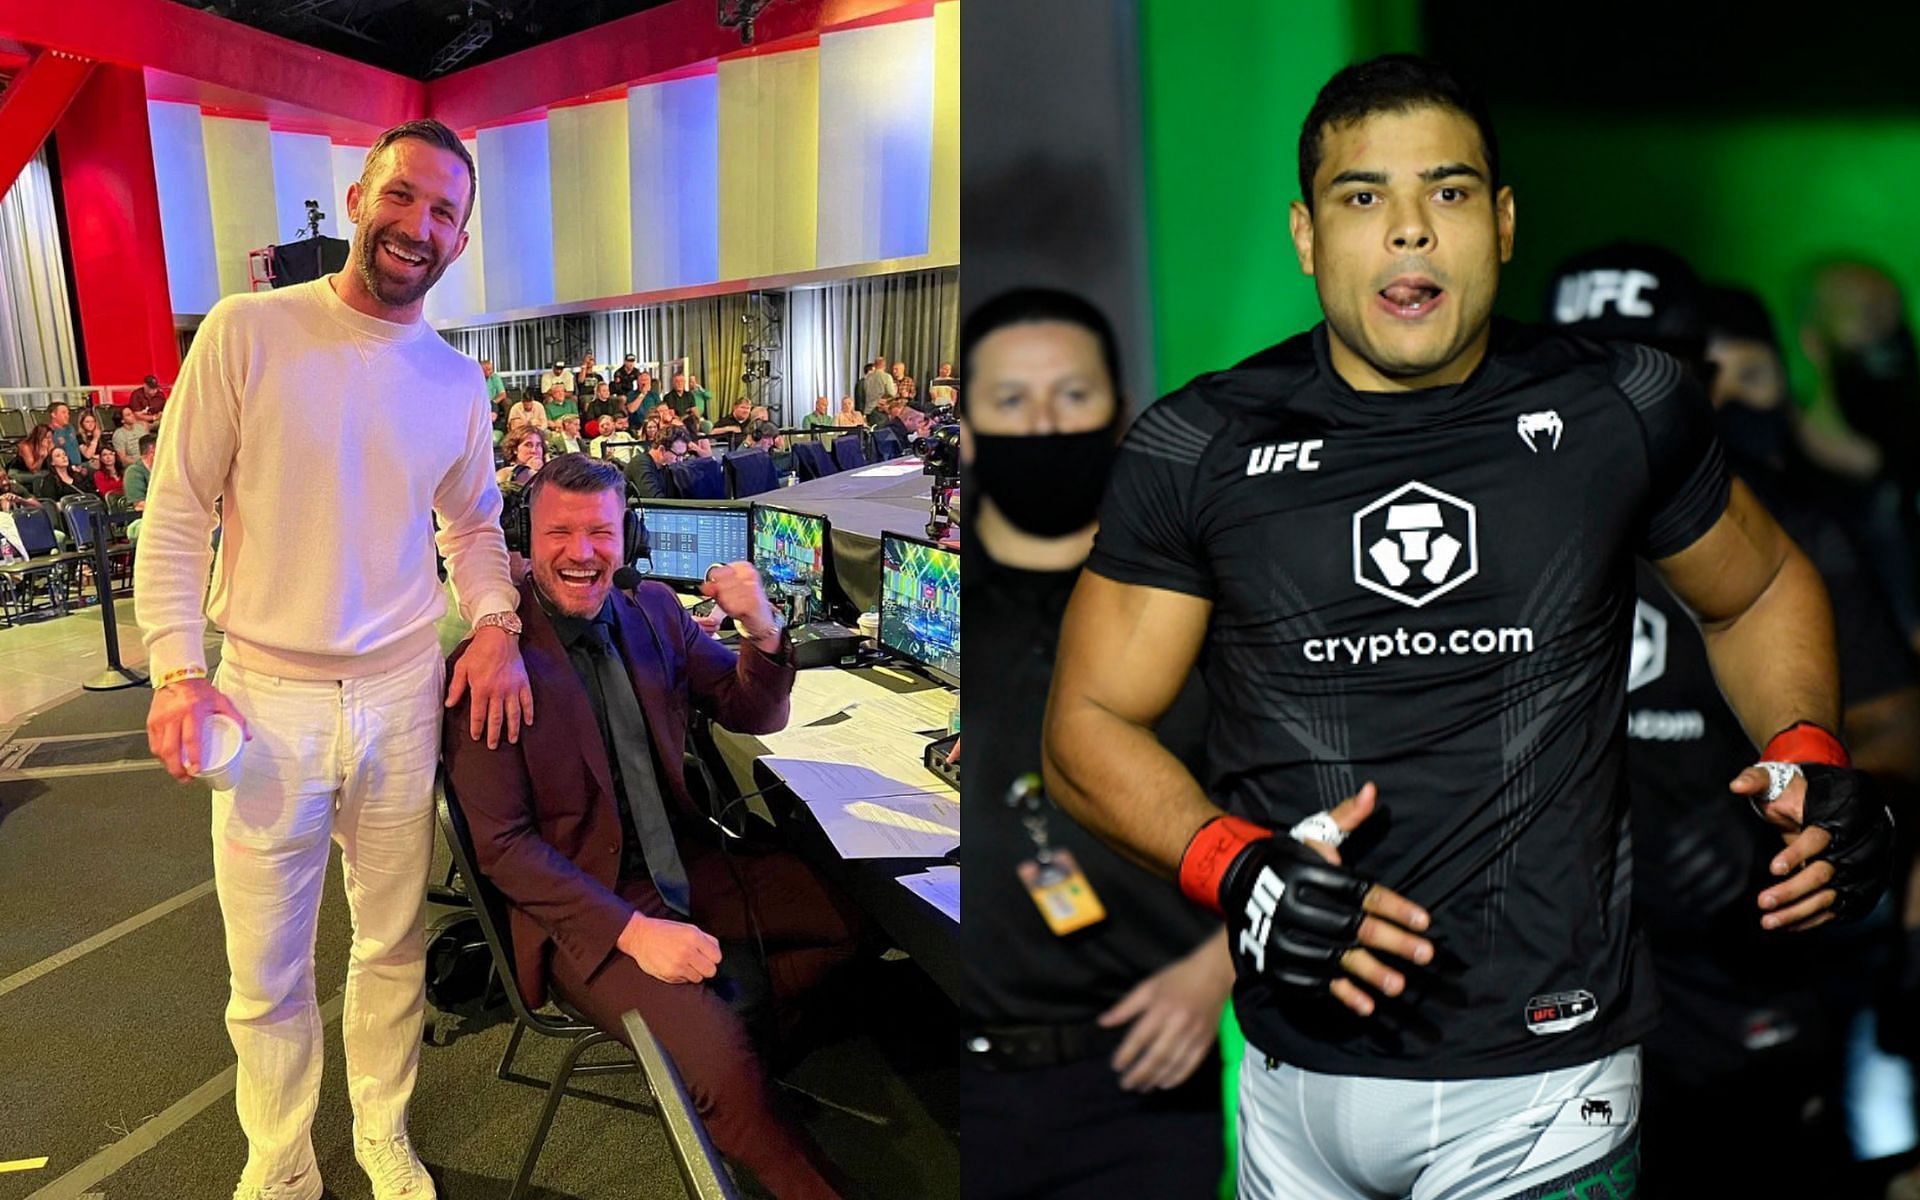 Michael Bisping and Luke Rockhold (Left) and Paulo Costa (Right) (Left image courtesy of @lukerockhold Instagram)